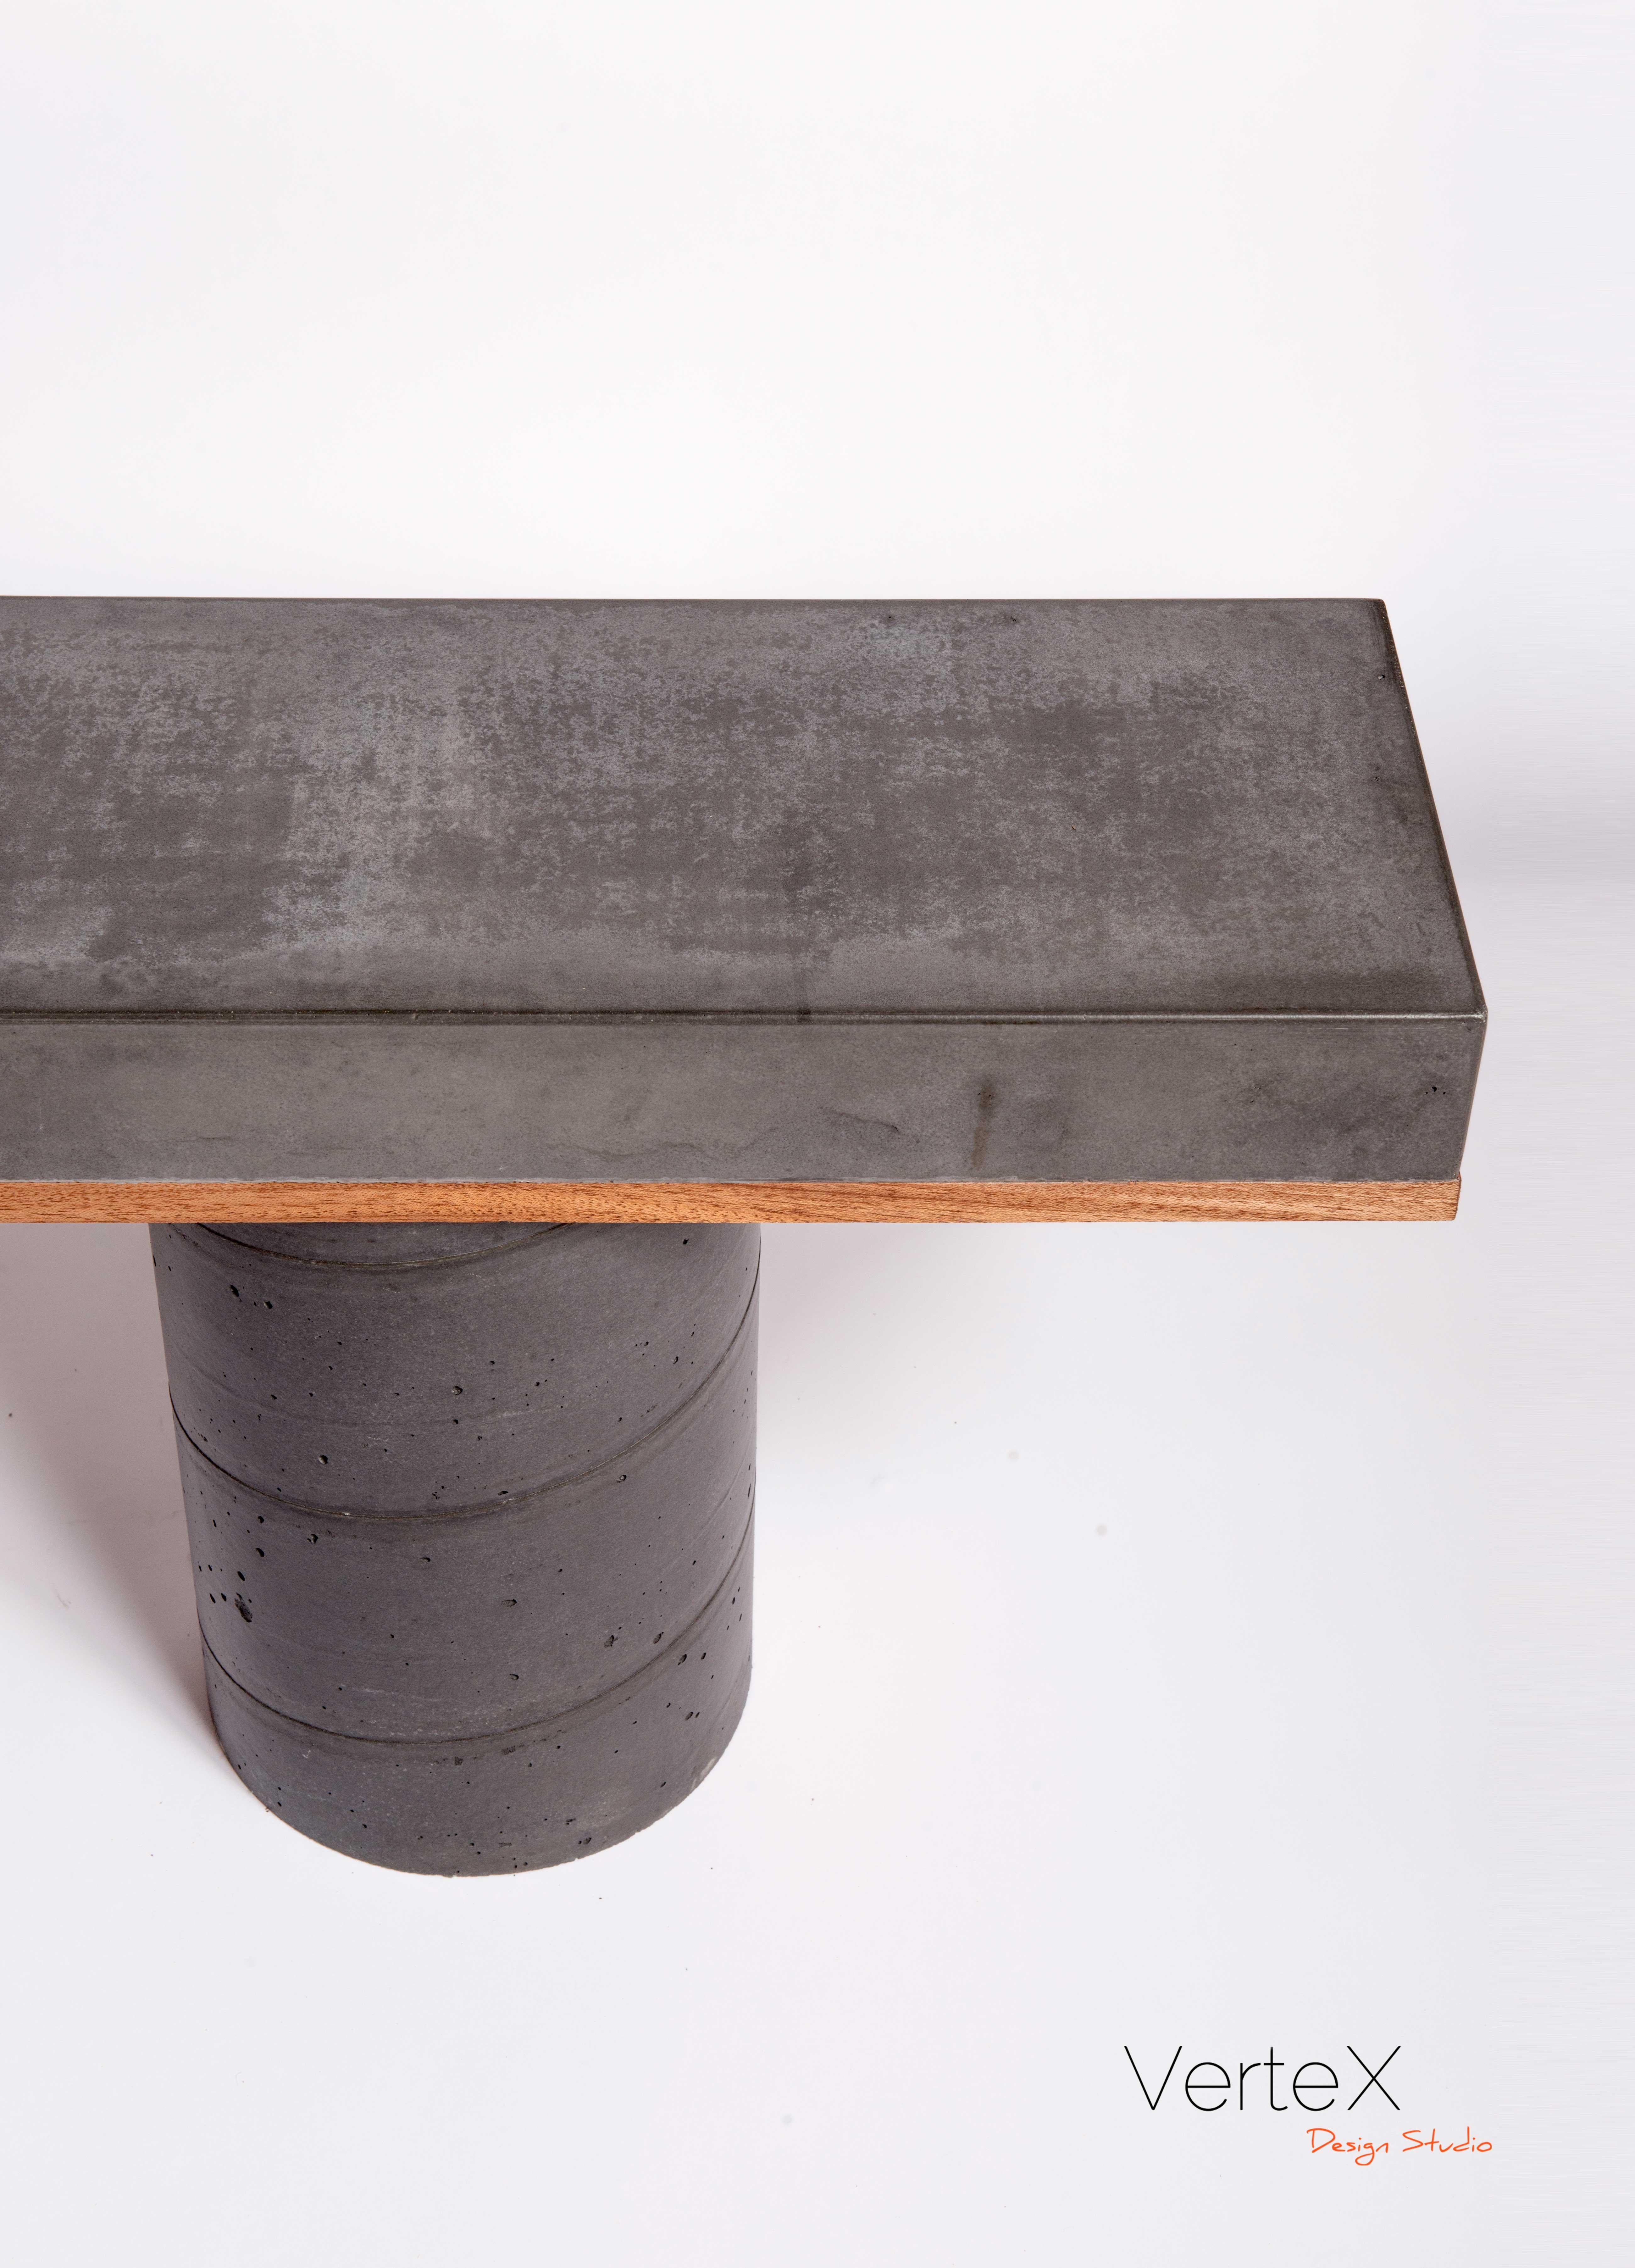 Concrete Kitsugi Column Bench Narrow In Distressed Condition For Sale In Hawthorne, CA